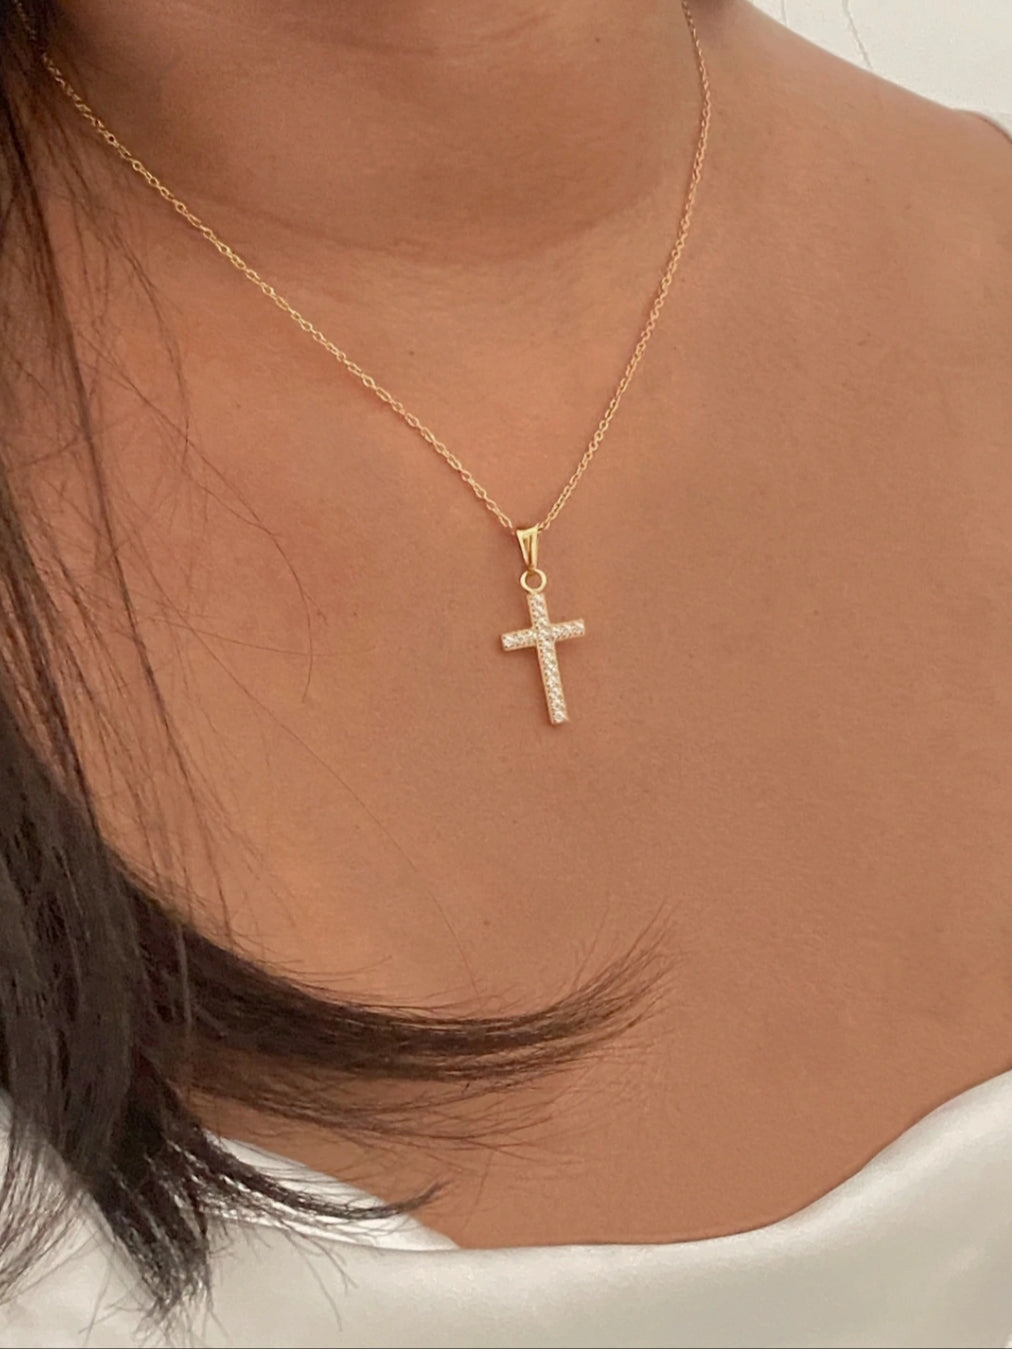 Silver Heart & Gold Plated Cross Pendant Necklace, 18 inches | Mardel